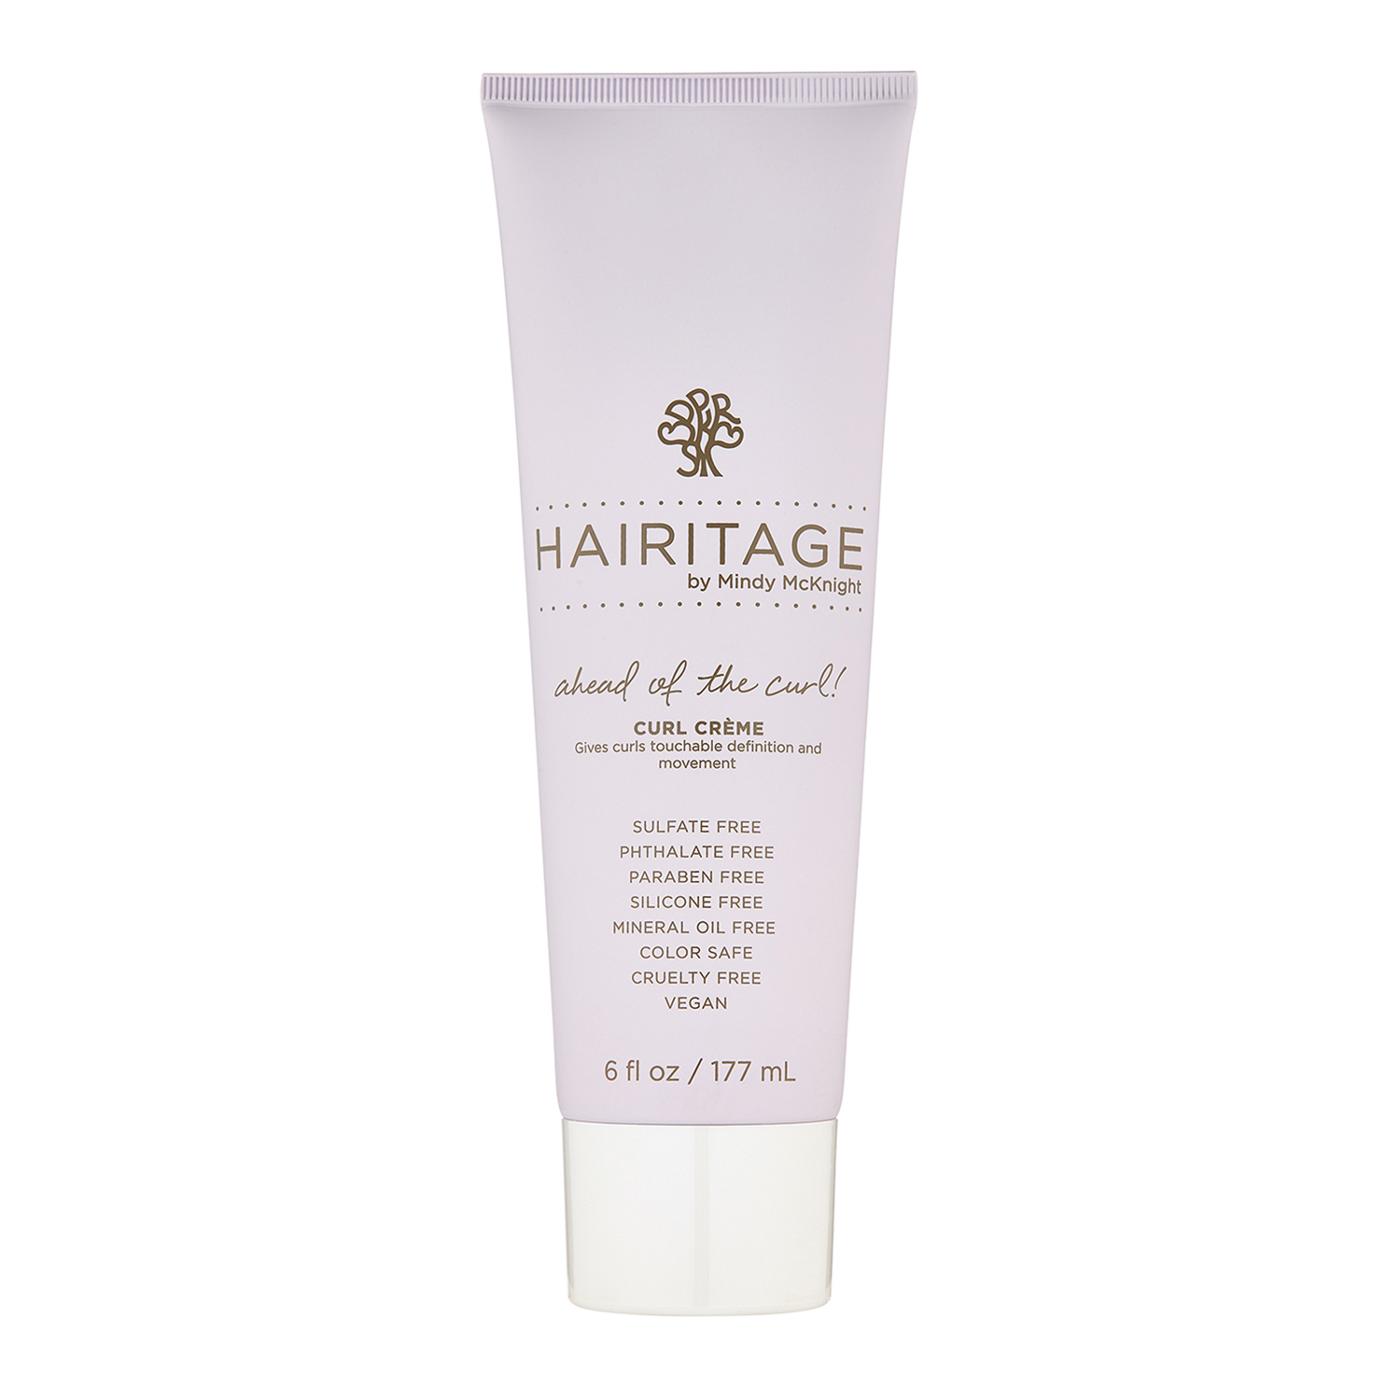 Hairitage Ahead of the Curl! Curl Crème; image 1 of 5